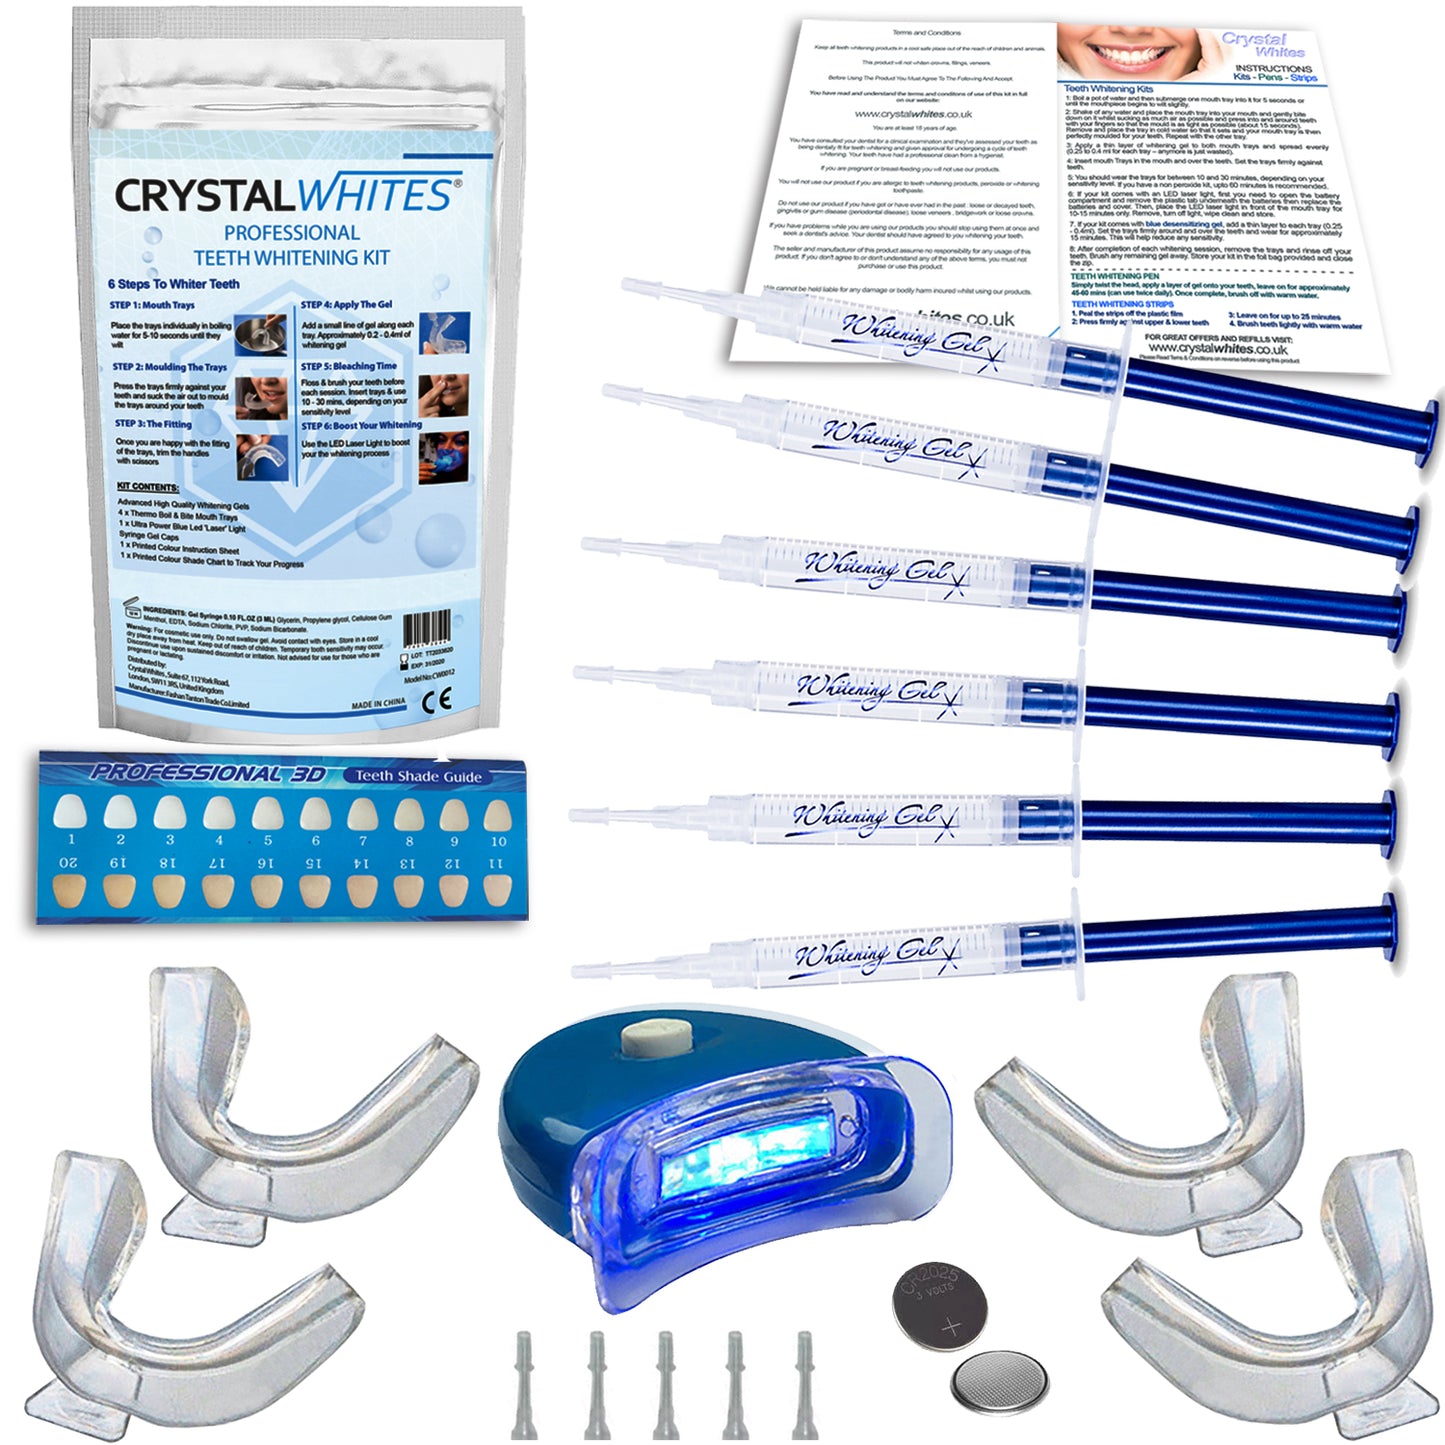 Teeth Whitening Kit With LED Light & 6 Gels - Professional